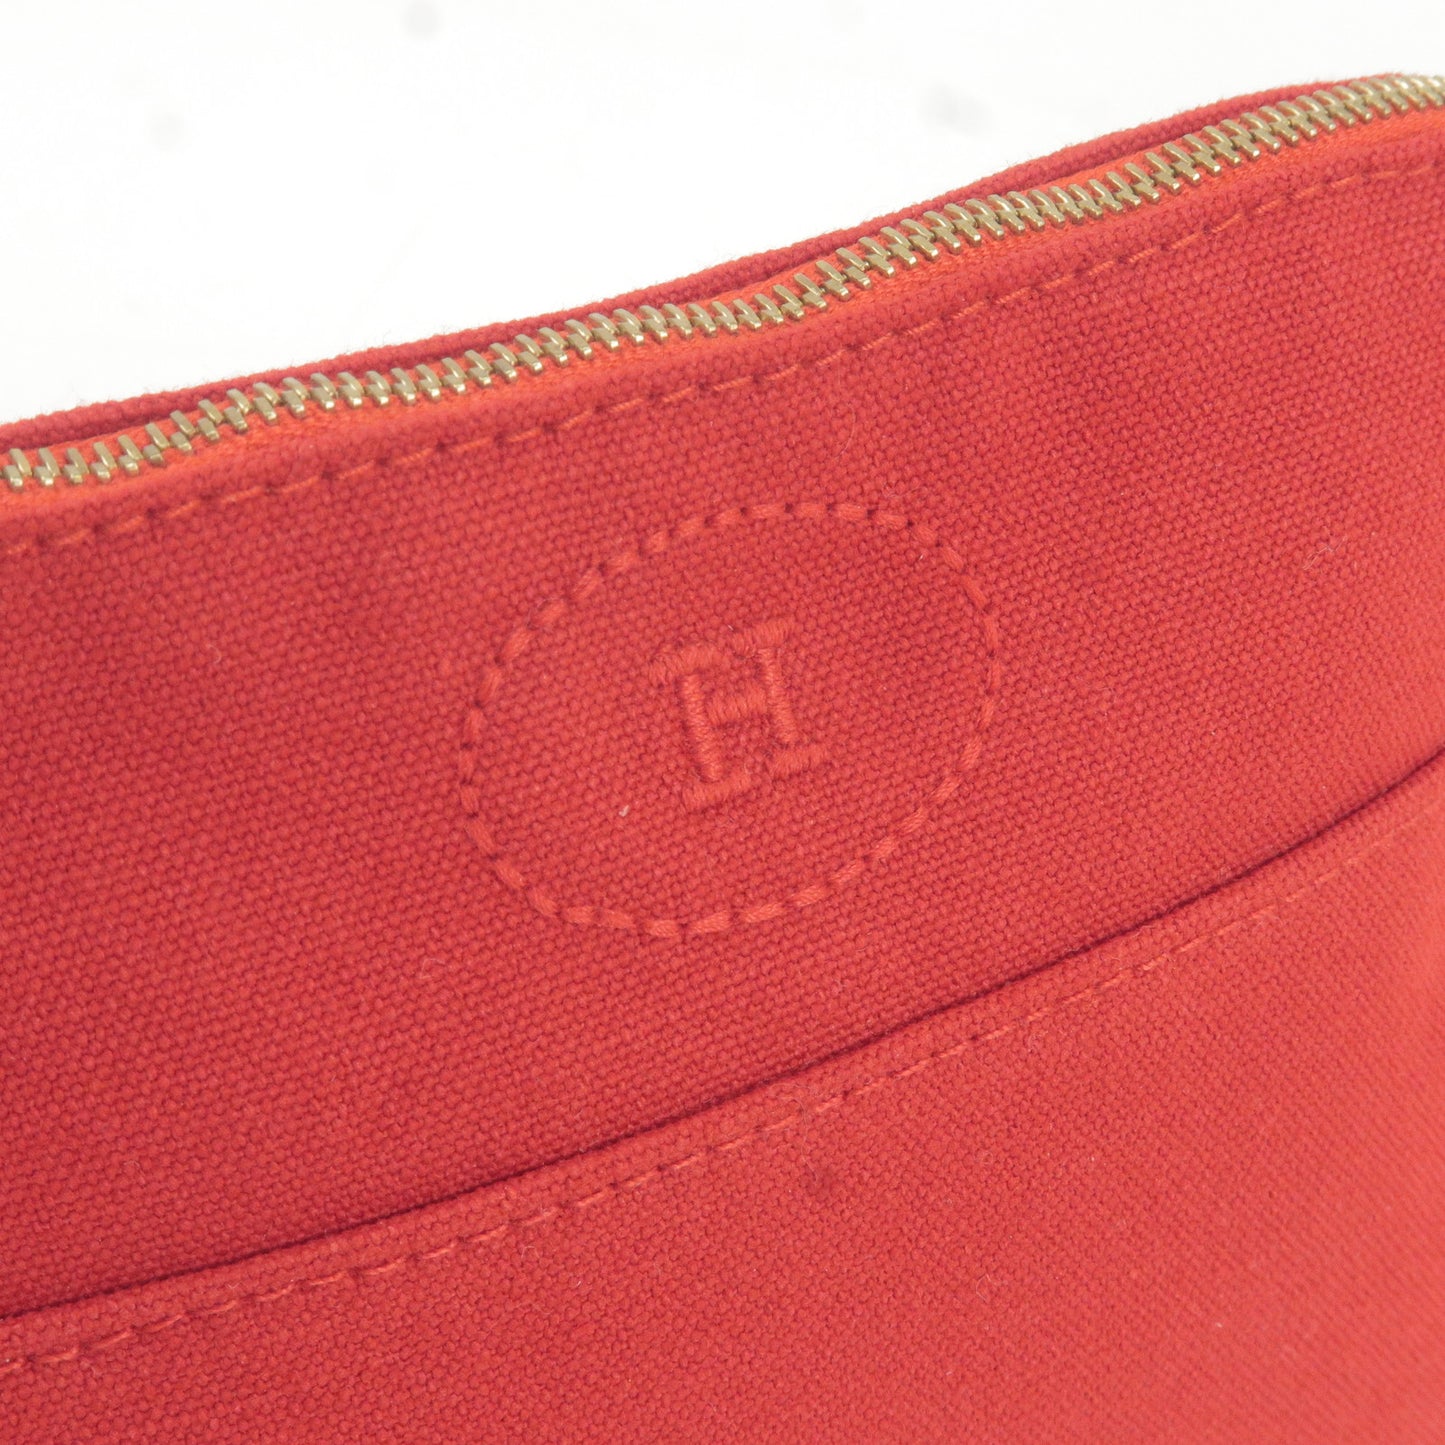 HERMES Canvas Leather Bolide Pouch PM Cosmetics Pouch Red